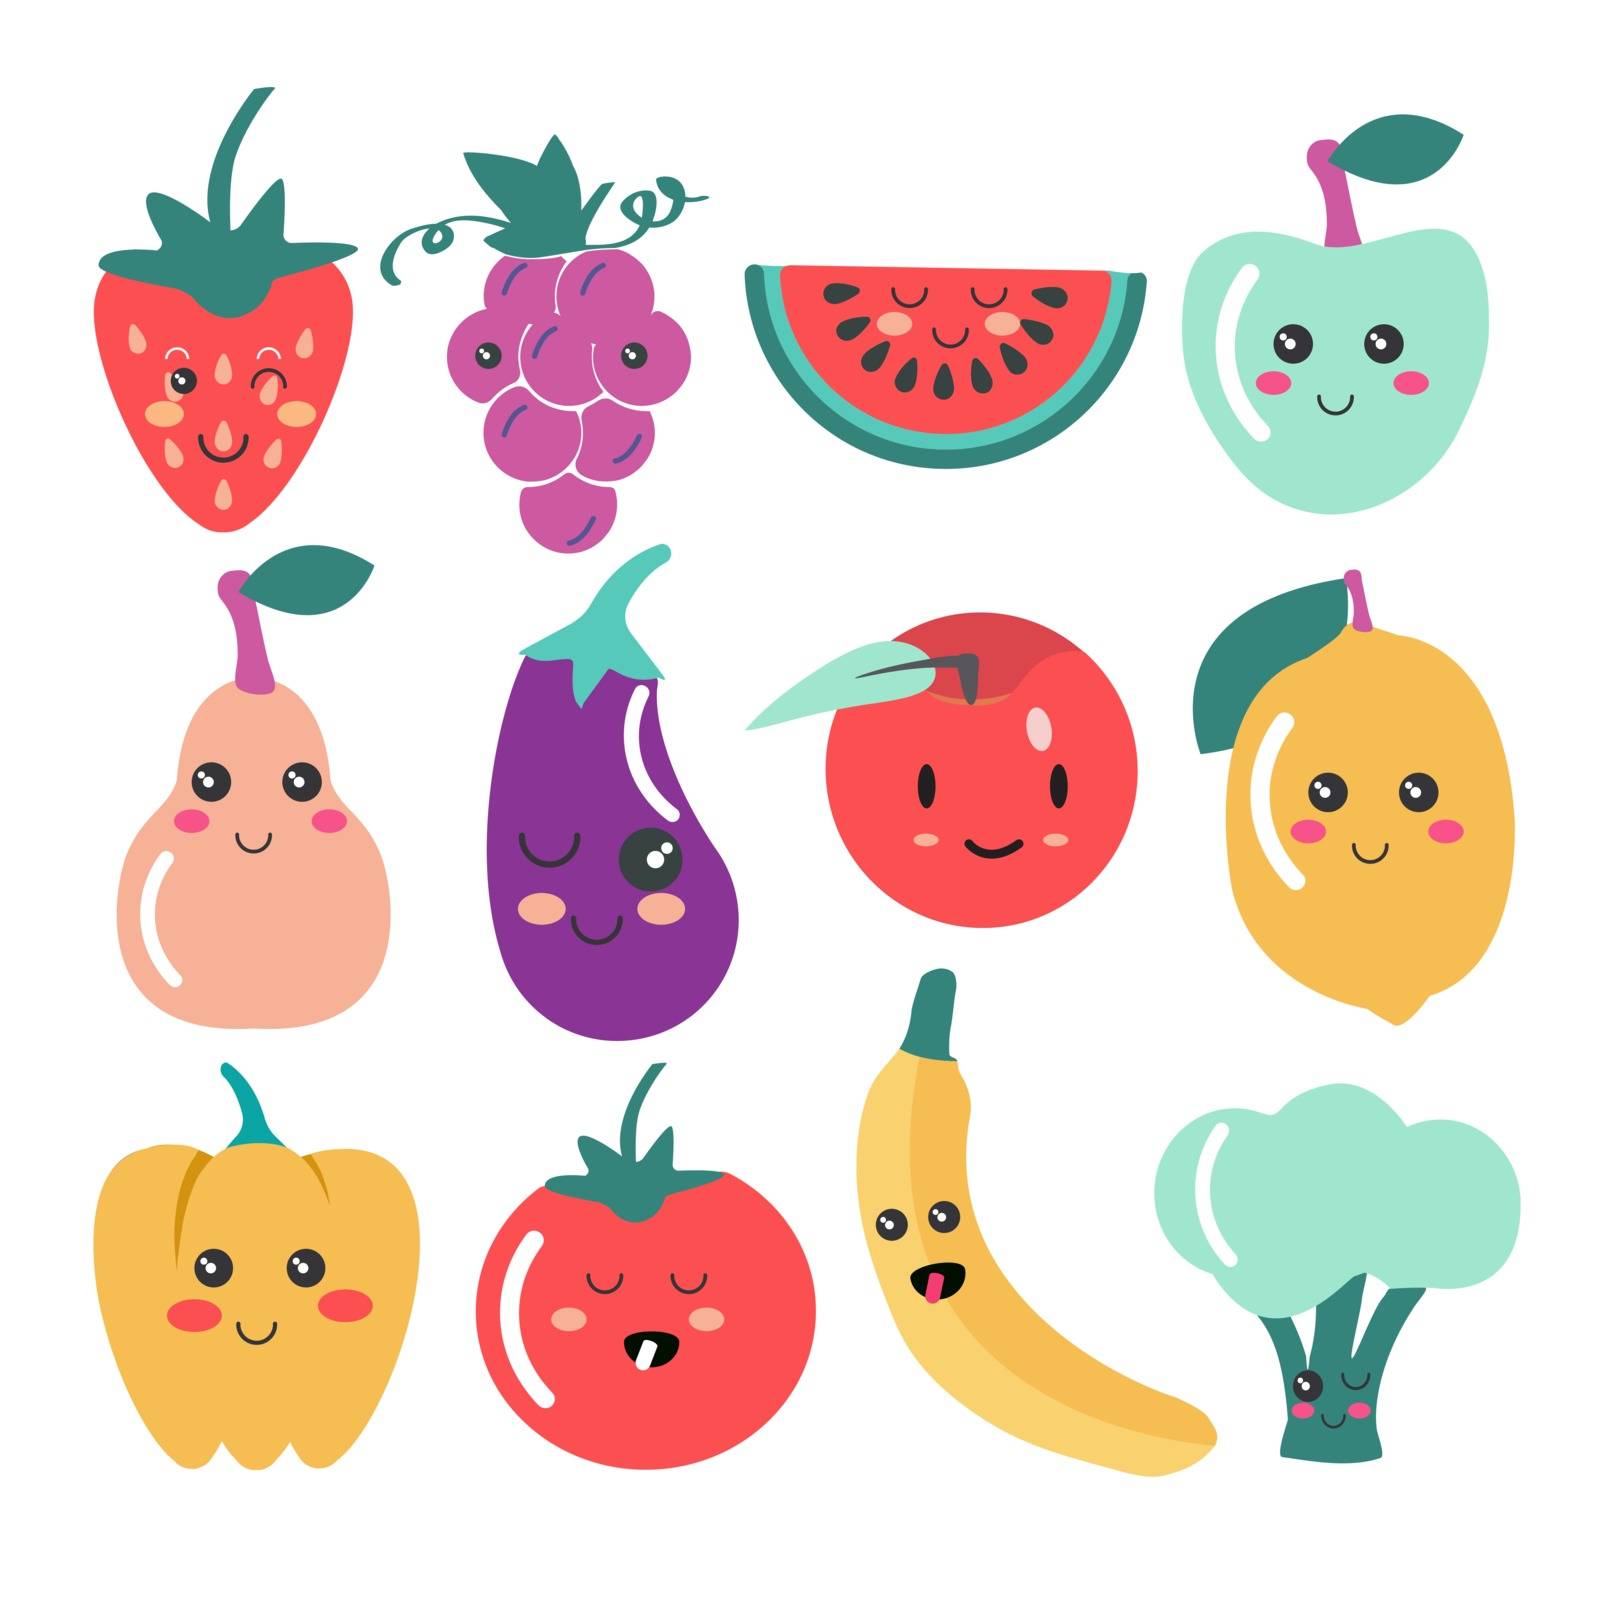 Cute Kawaii fruit and vegetable icons.  by Margolana